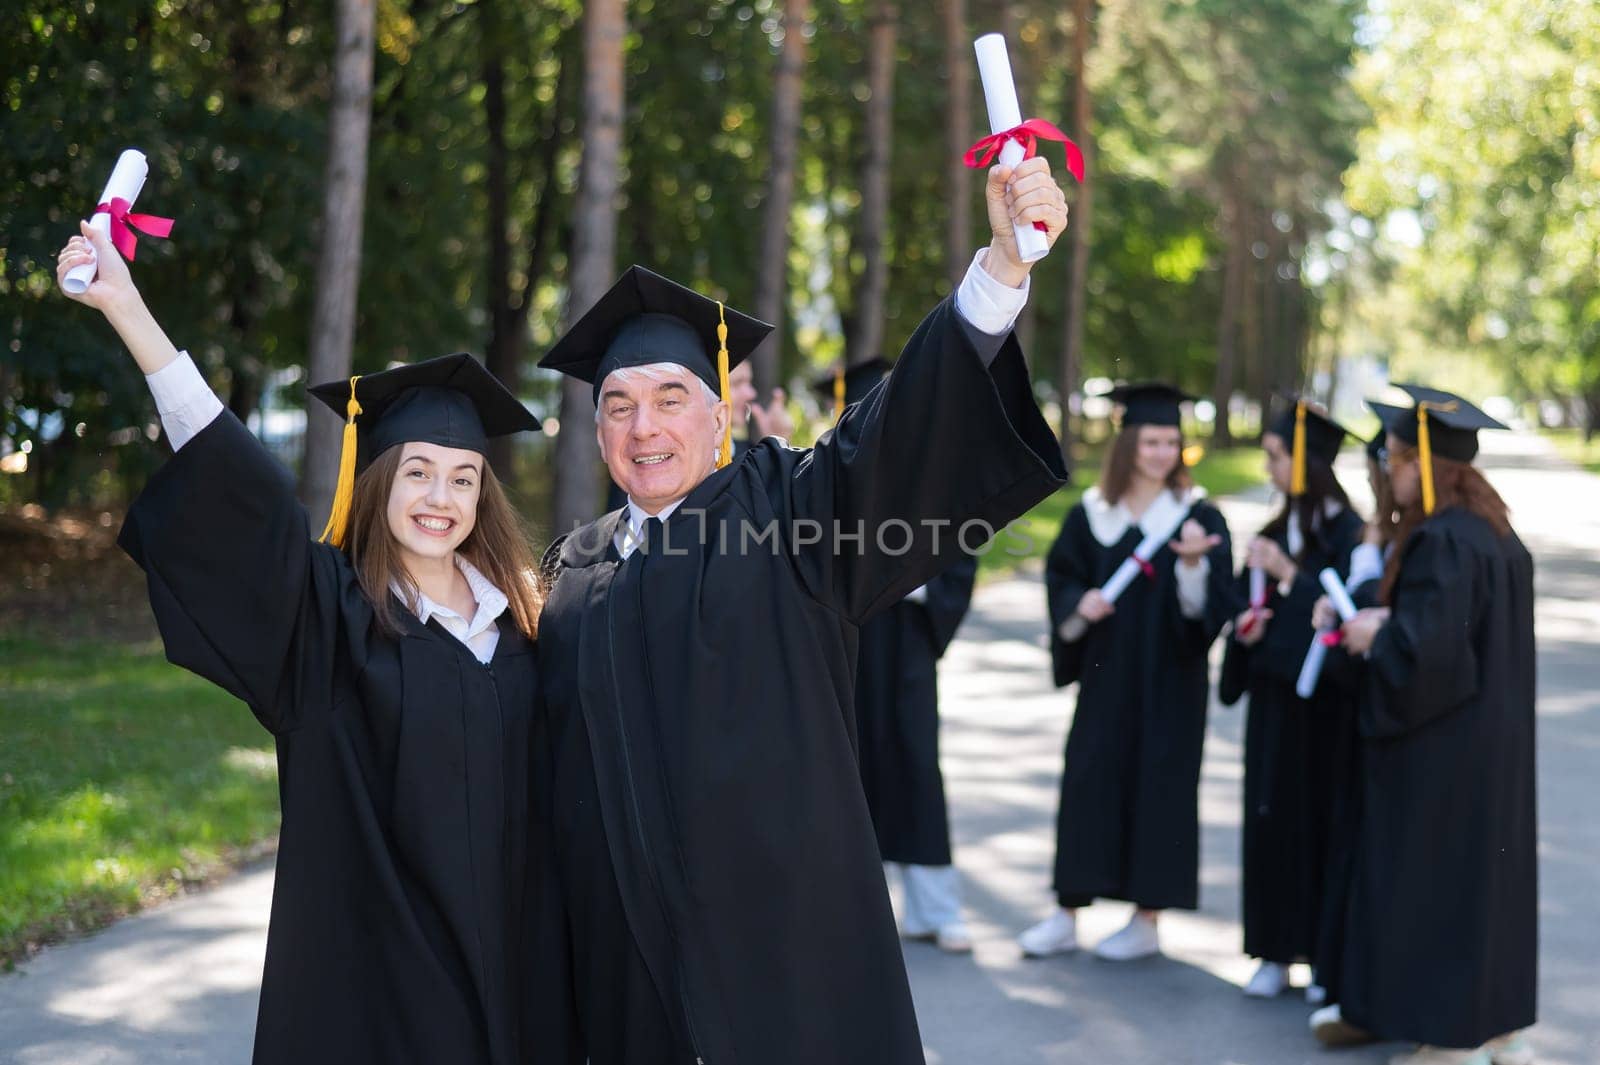 A group of graduates in robes outdoors. An elderly man and a young woman congratulate each other on their graduation. by mrwed54